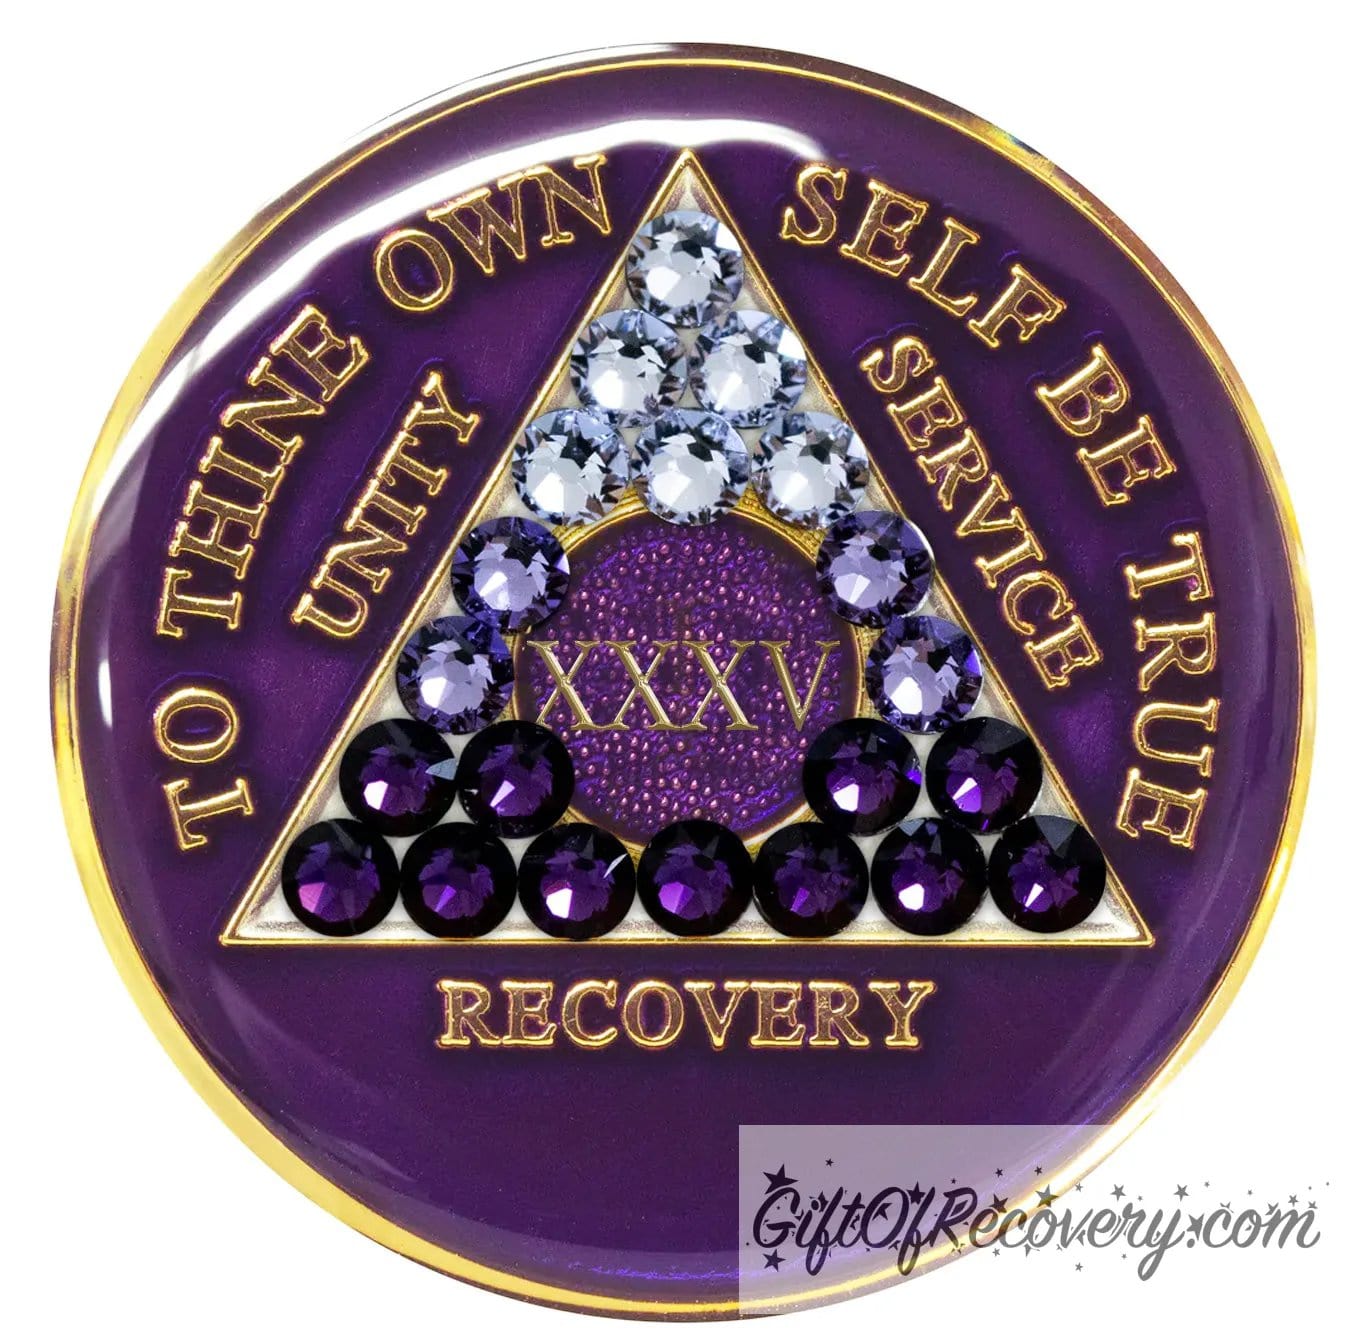 35 year Amethyst purple AA medallion with 21 genuine crystals ranging from light to dark for symbolism of transition, the triangle, circle, roman numeral, unity, recovery, service, and to thine own self be true, are embossed with 14k gold, while the middle of the circle with the roman numeral is purple glitter, the recovery medallion is sealed with resin for a glossy finish. 